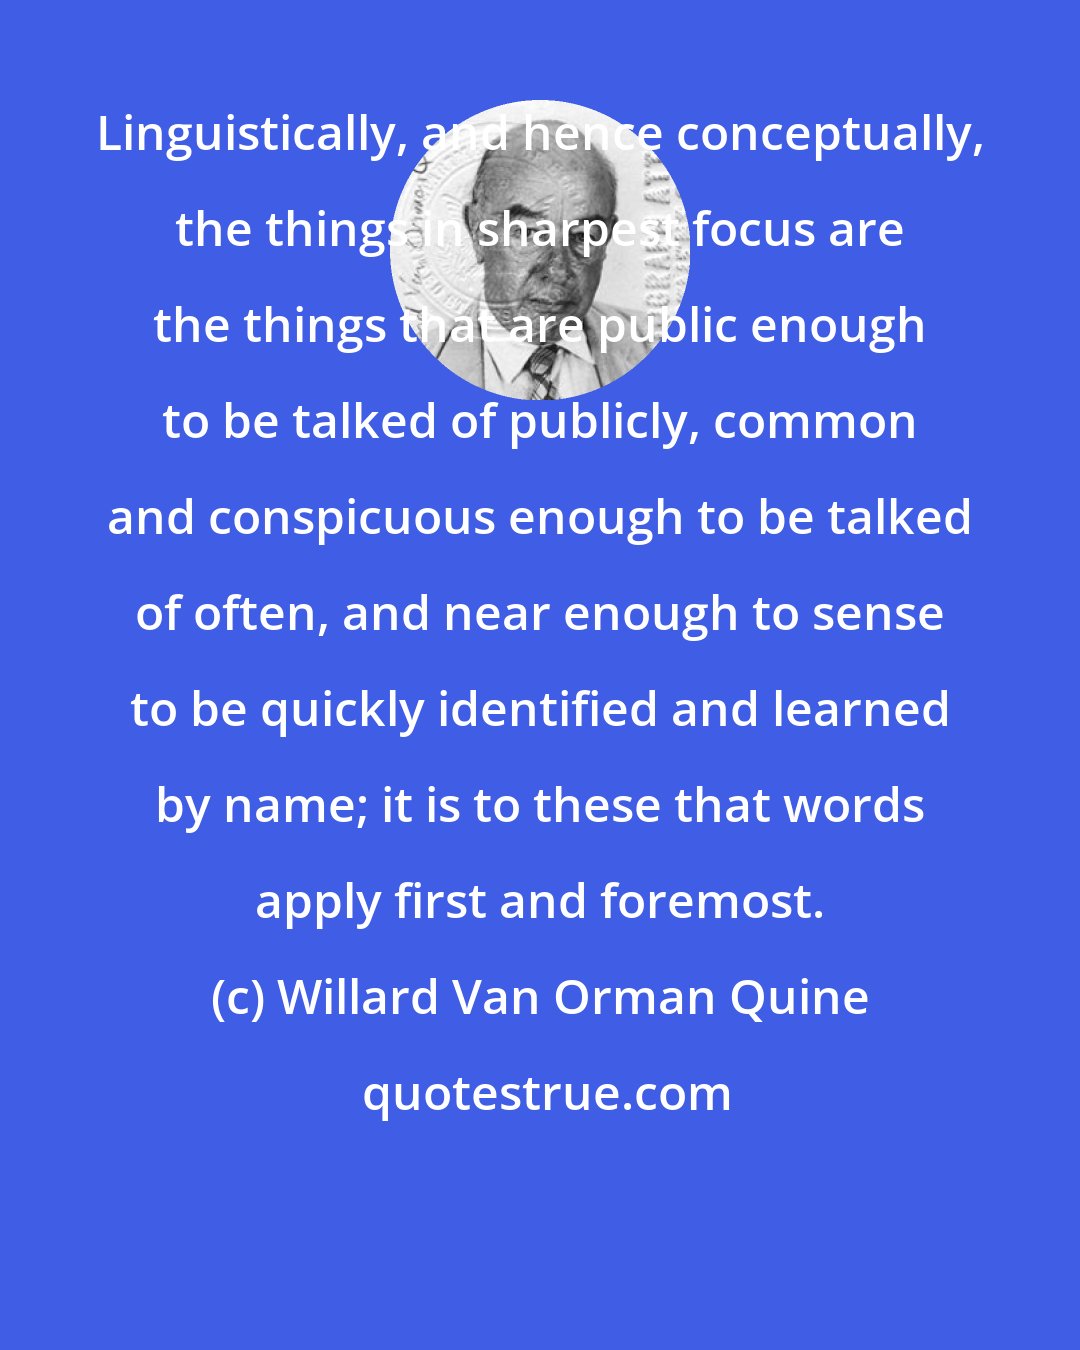 Willard Van Orman Quine: Linguistically, and hence conceptually, the things in sharpest focus are the things that are public enough to be talked of publicly, common and conspicuous enough to be talked of often, and near enough to sense to be quickly identified and learned by name; it is to these that words apply first and foremost.